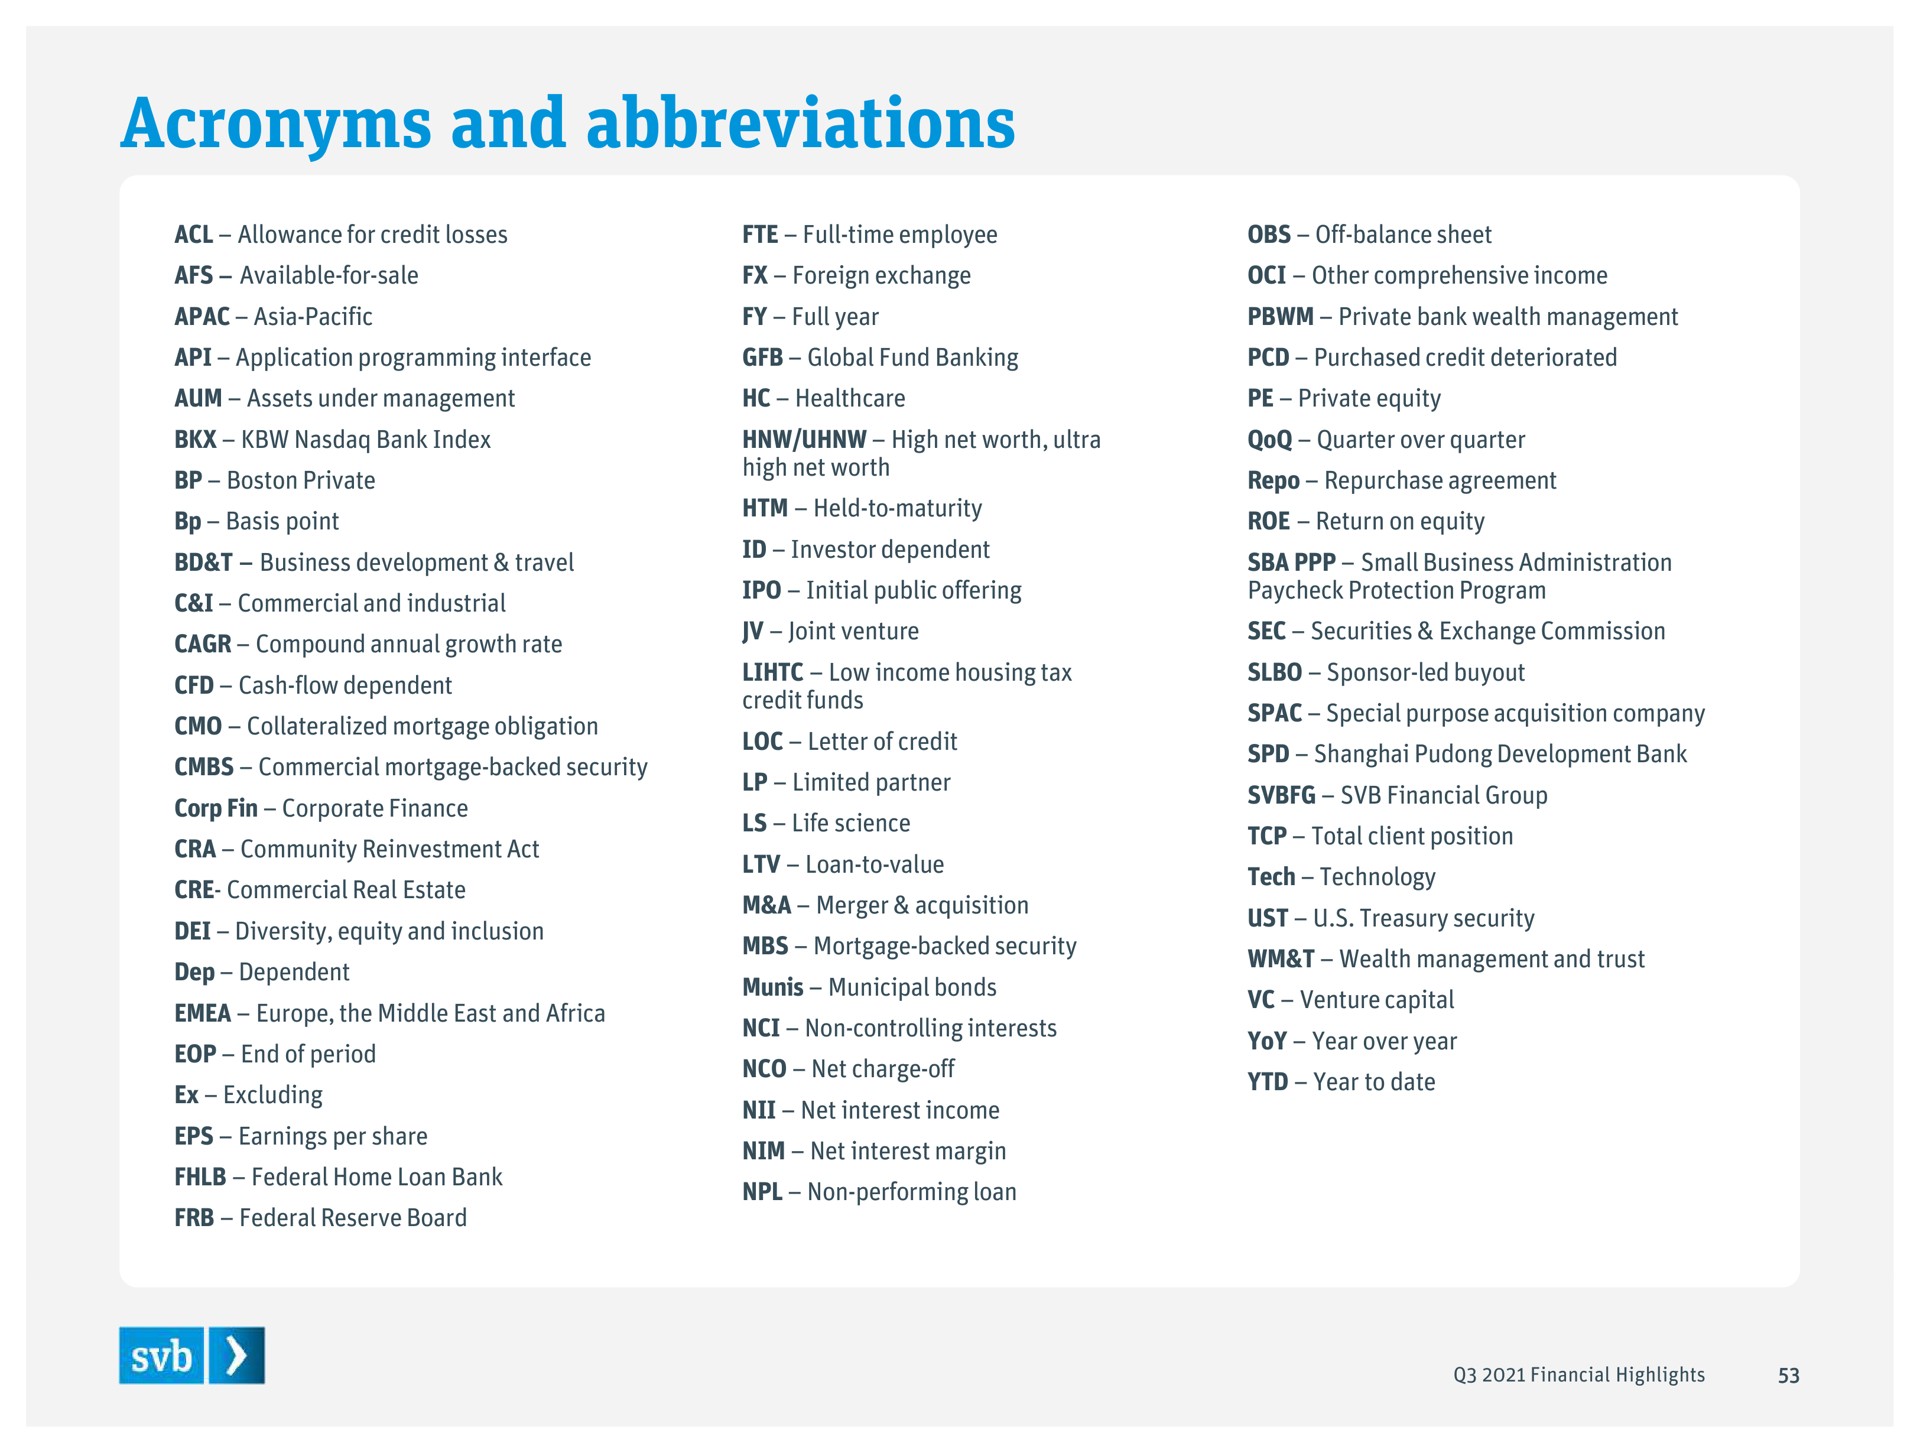 acronyms and abbreviations | Silicon Valley Bank